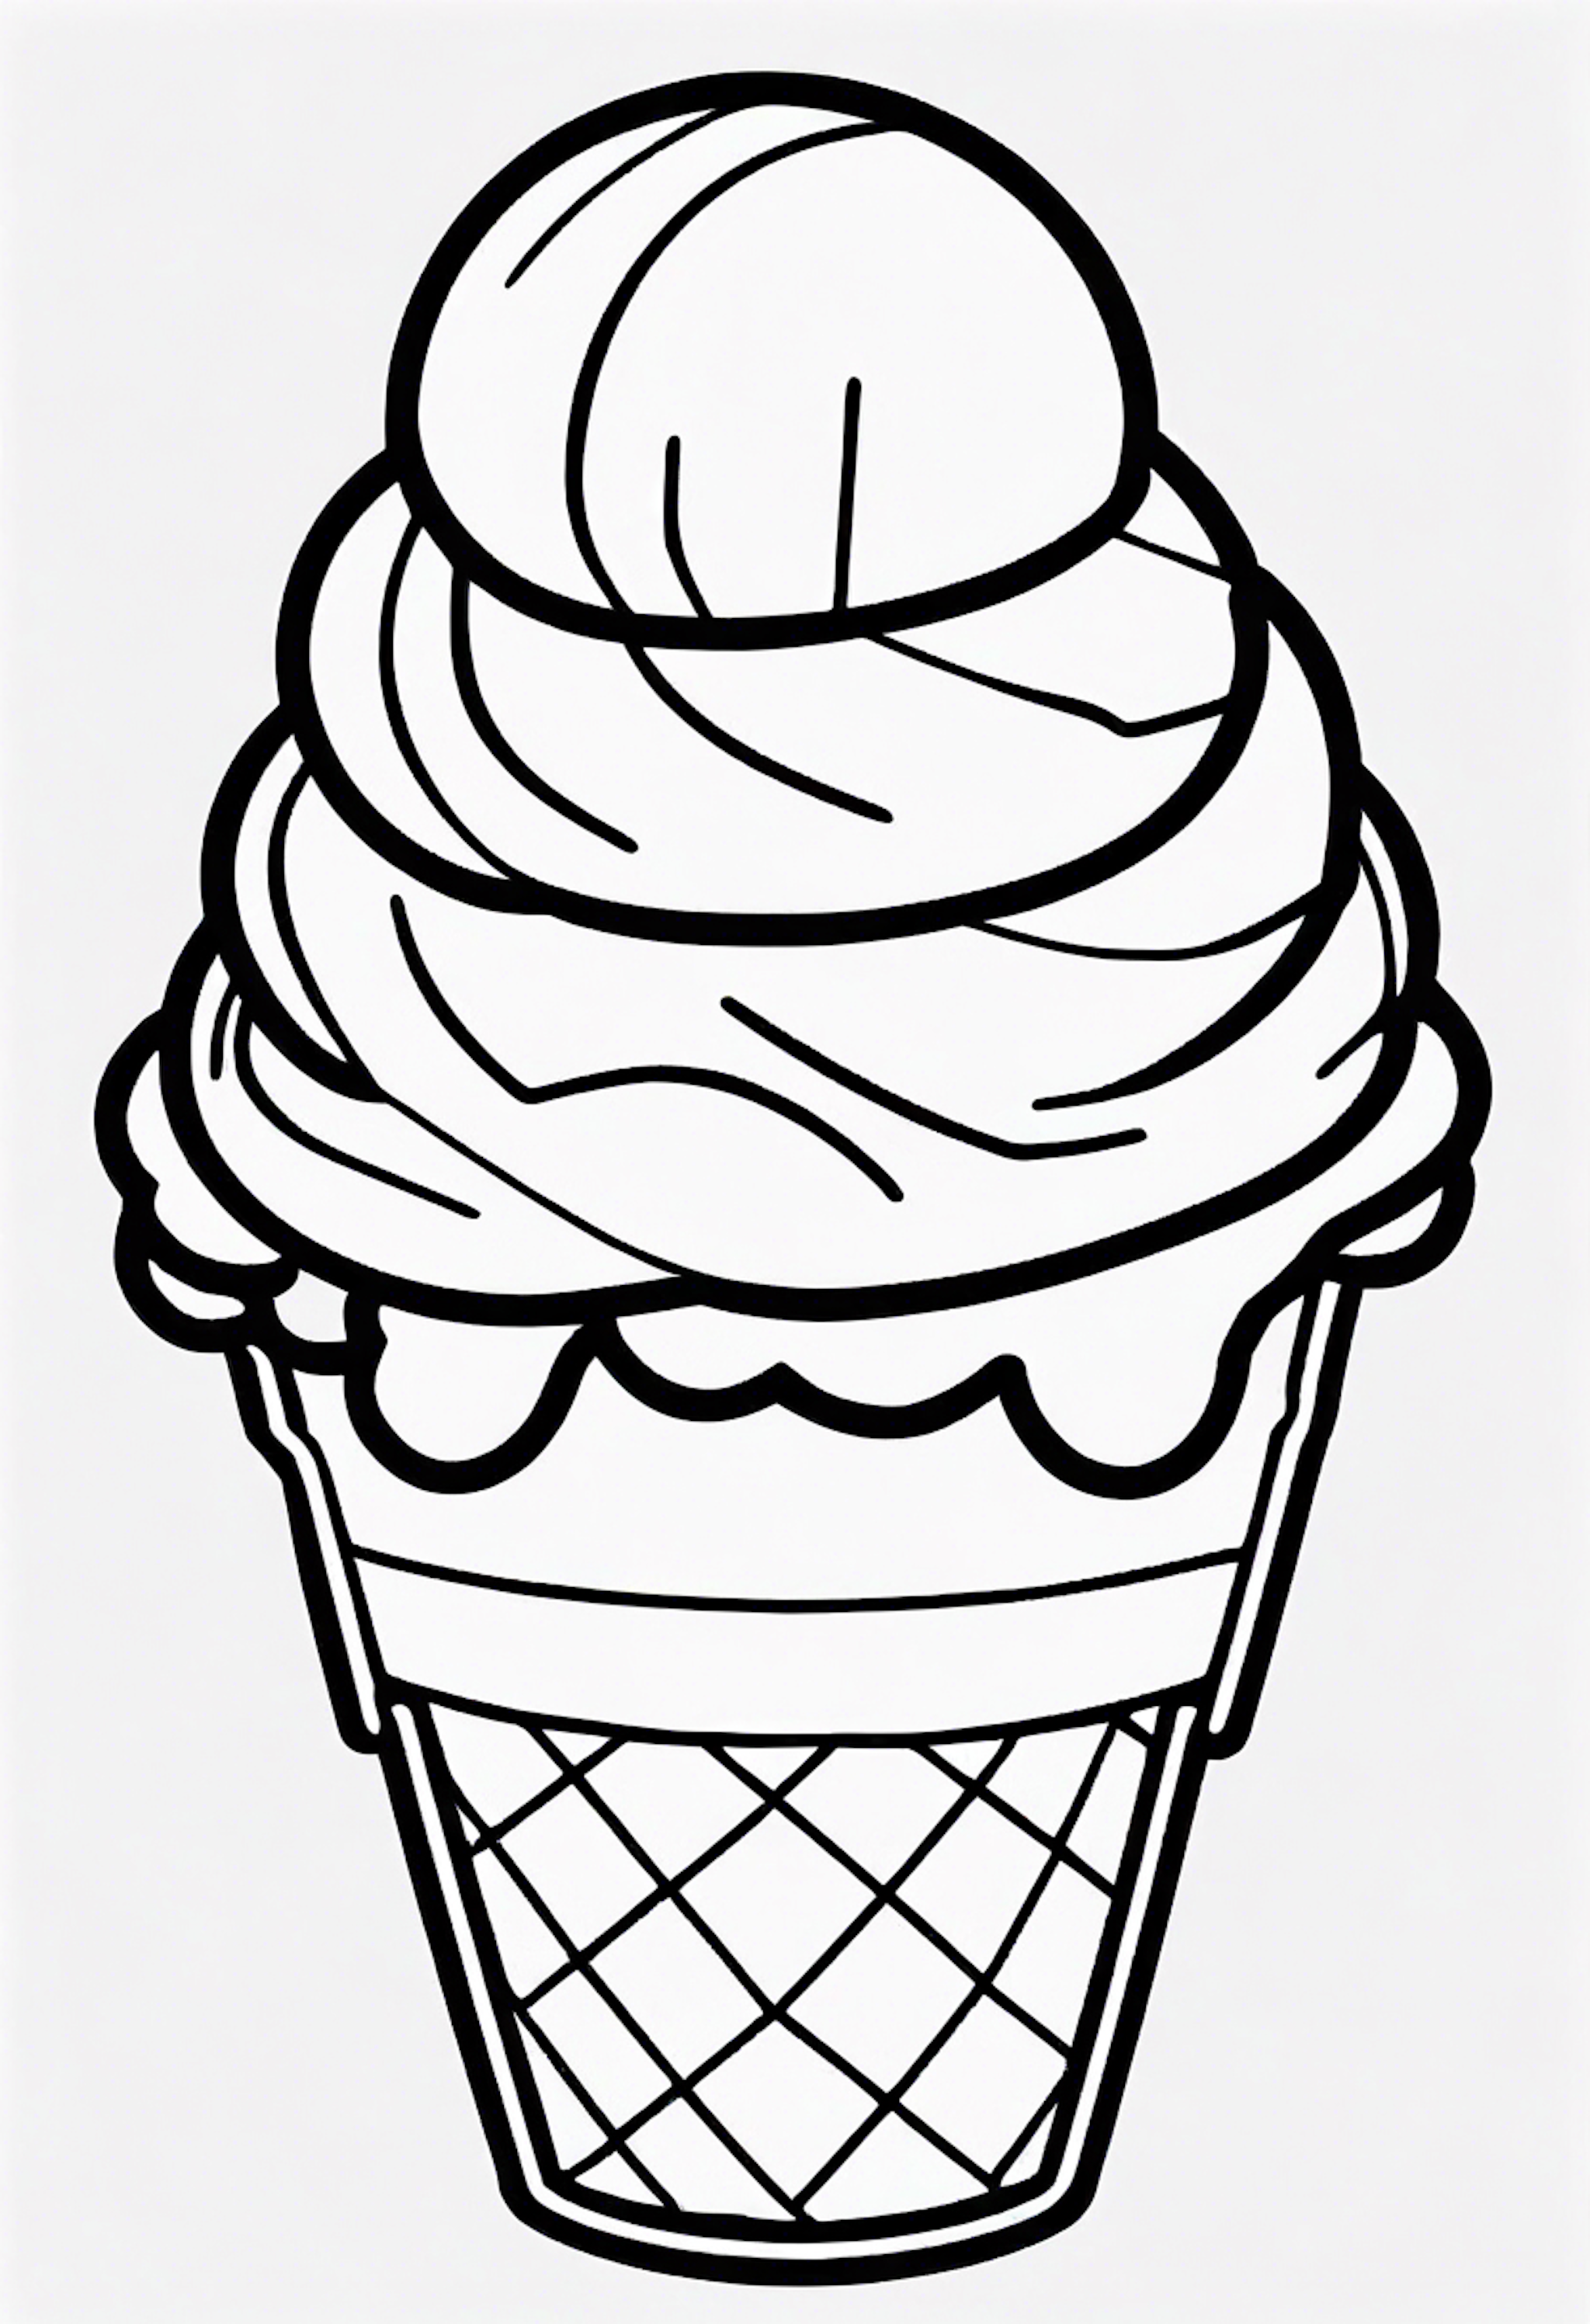 A coloring page for 34 Ice Cream coloring pages